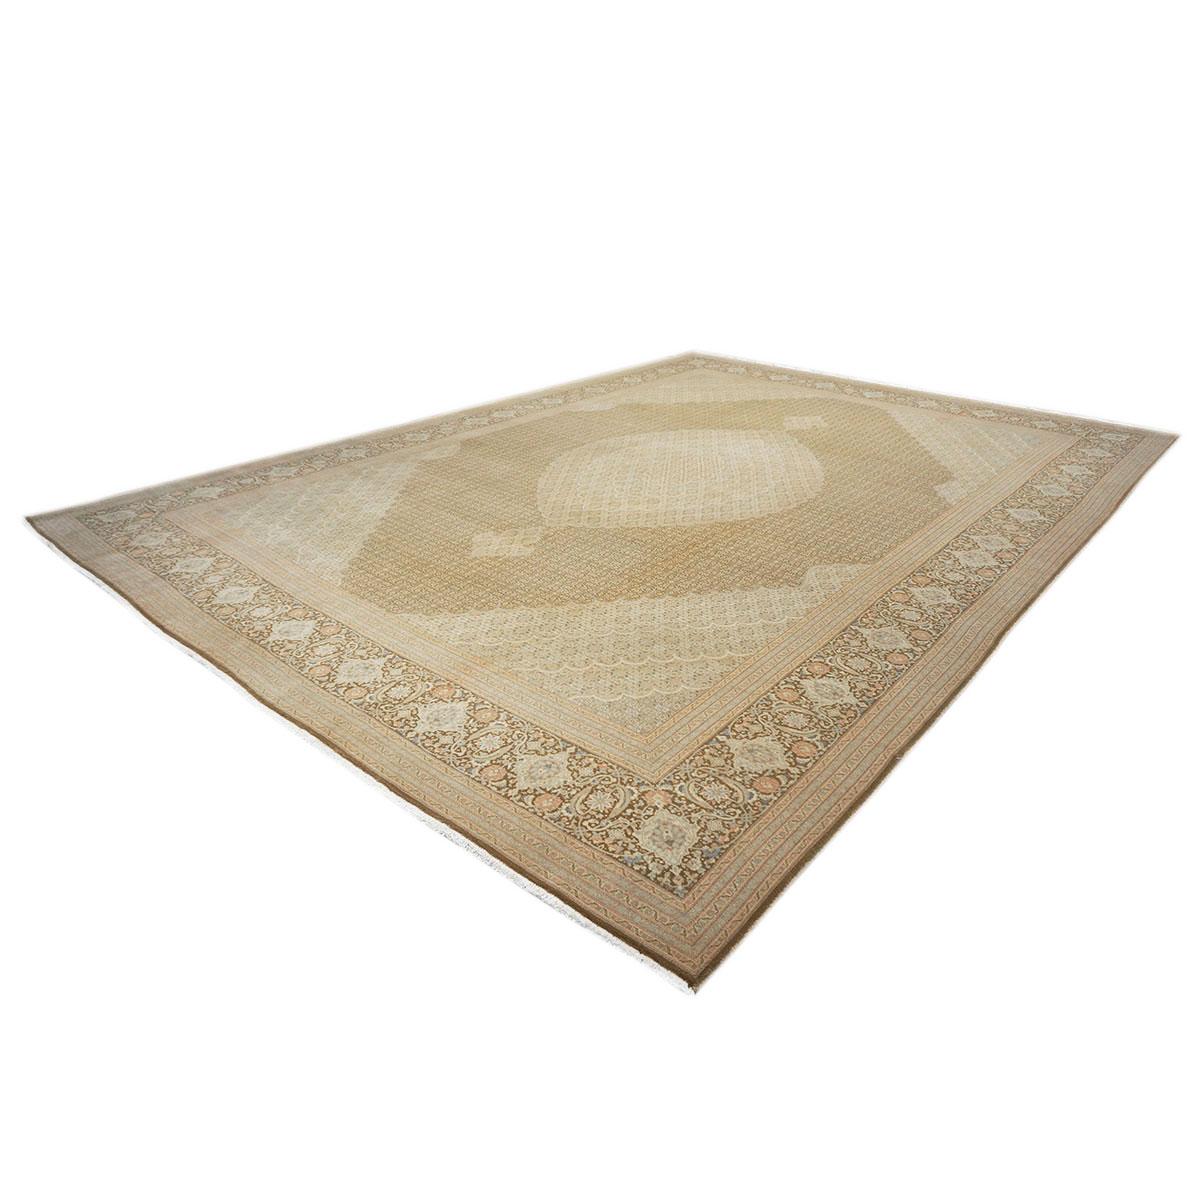 Antique 1940s Persian Tabriz 10x14 Ivory, Brown, & Tan Handmade Area Rug In Good Condition For Sale In Houston, TX